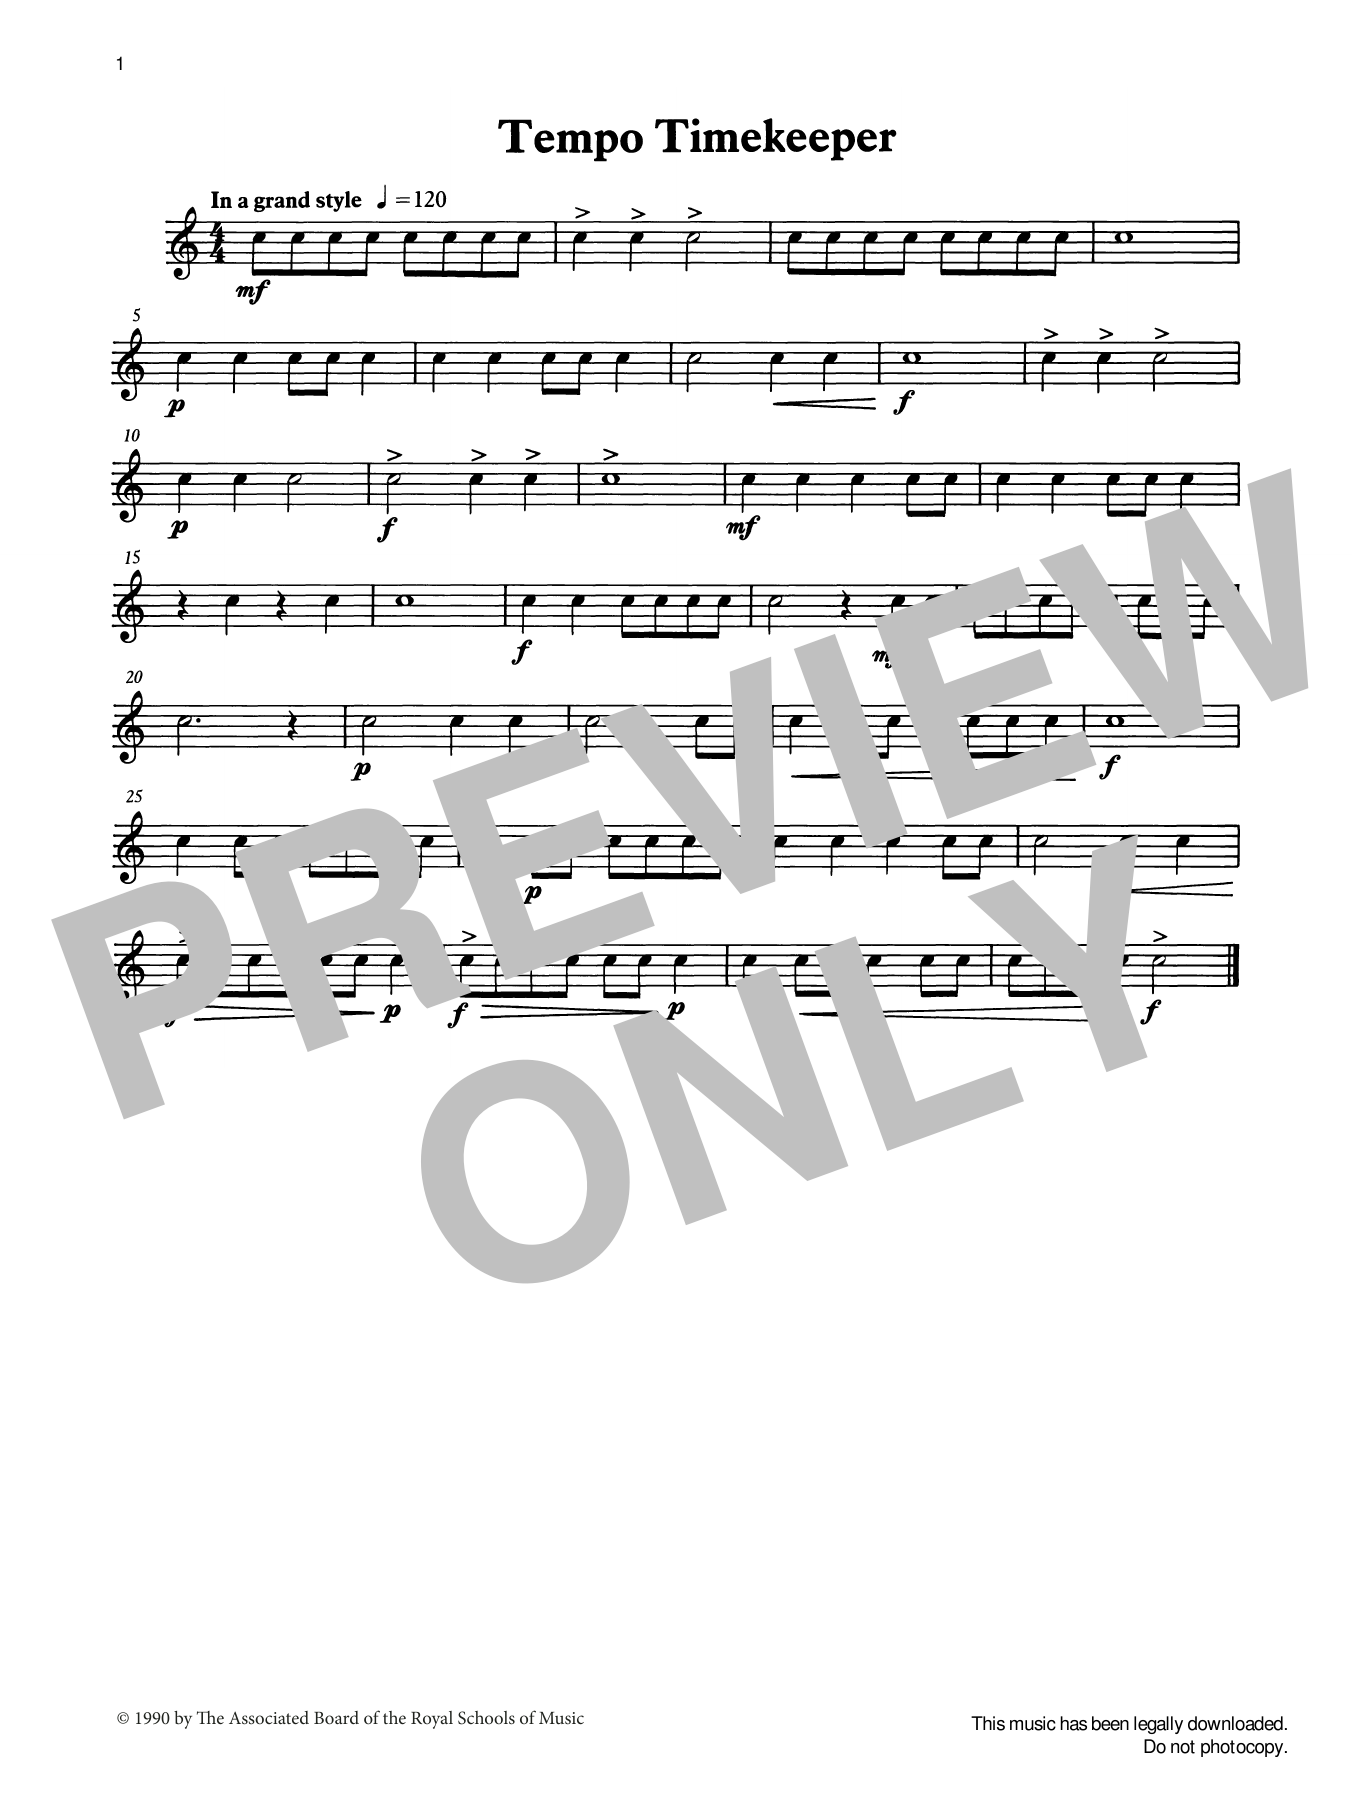 Tempo Timekeeper from Graded Music for Snare Drum, Book I (Percussion Solo) von Ian Wright and Kevin Hathaway